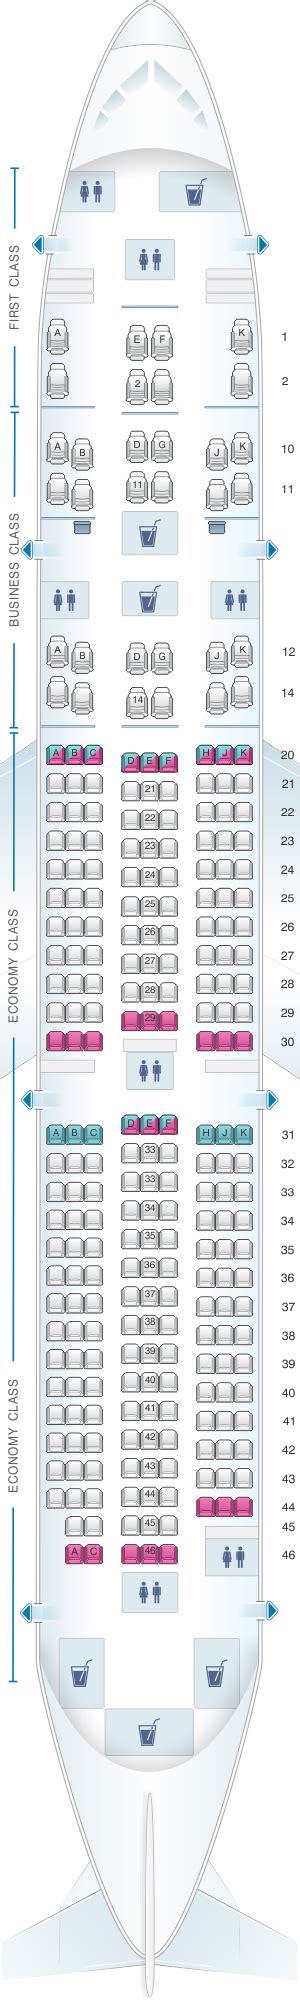 Boeing 787 9 Seat Map Oman Air Elcho Table